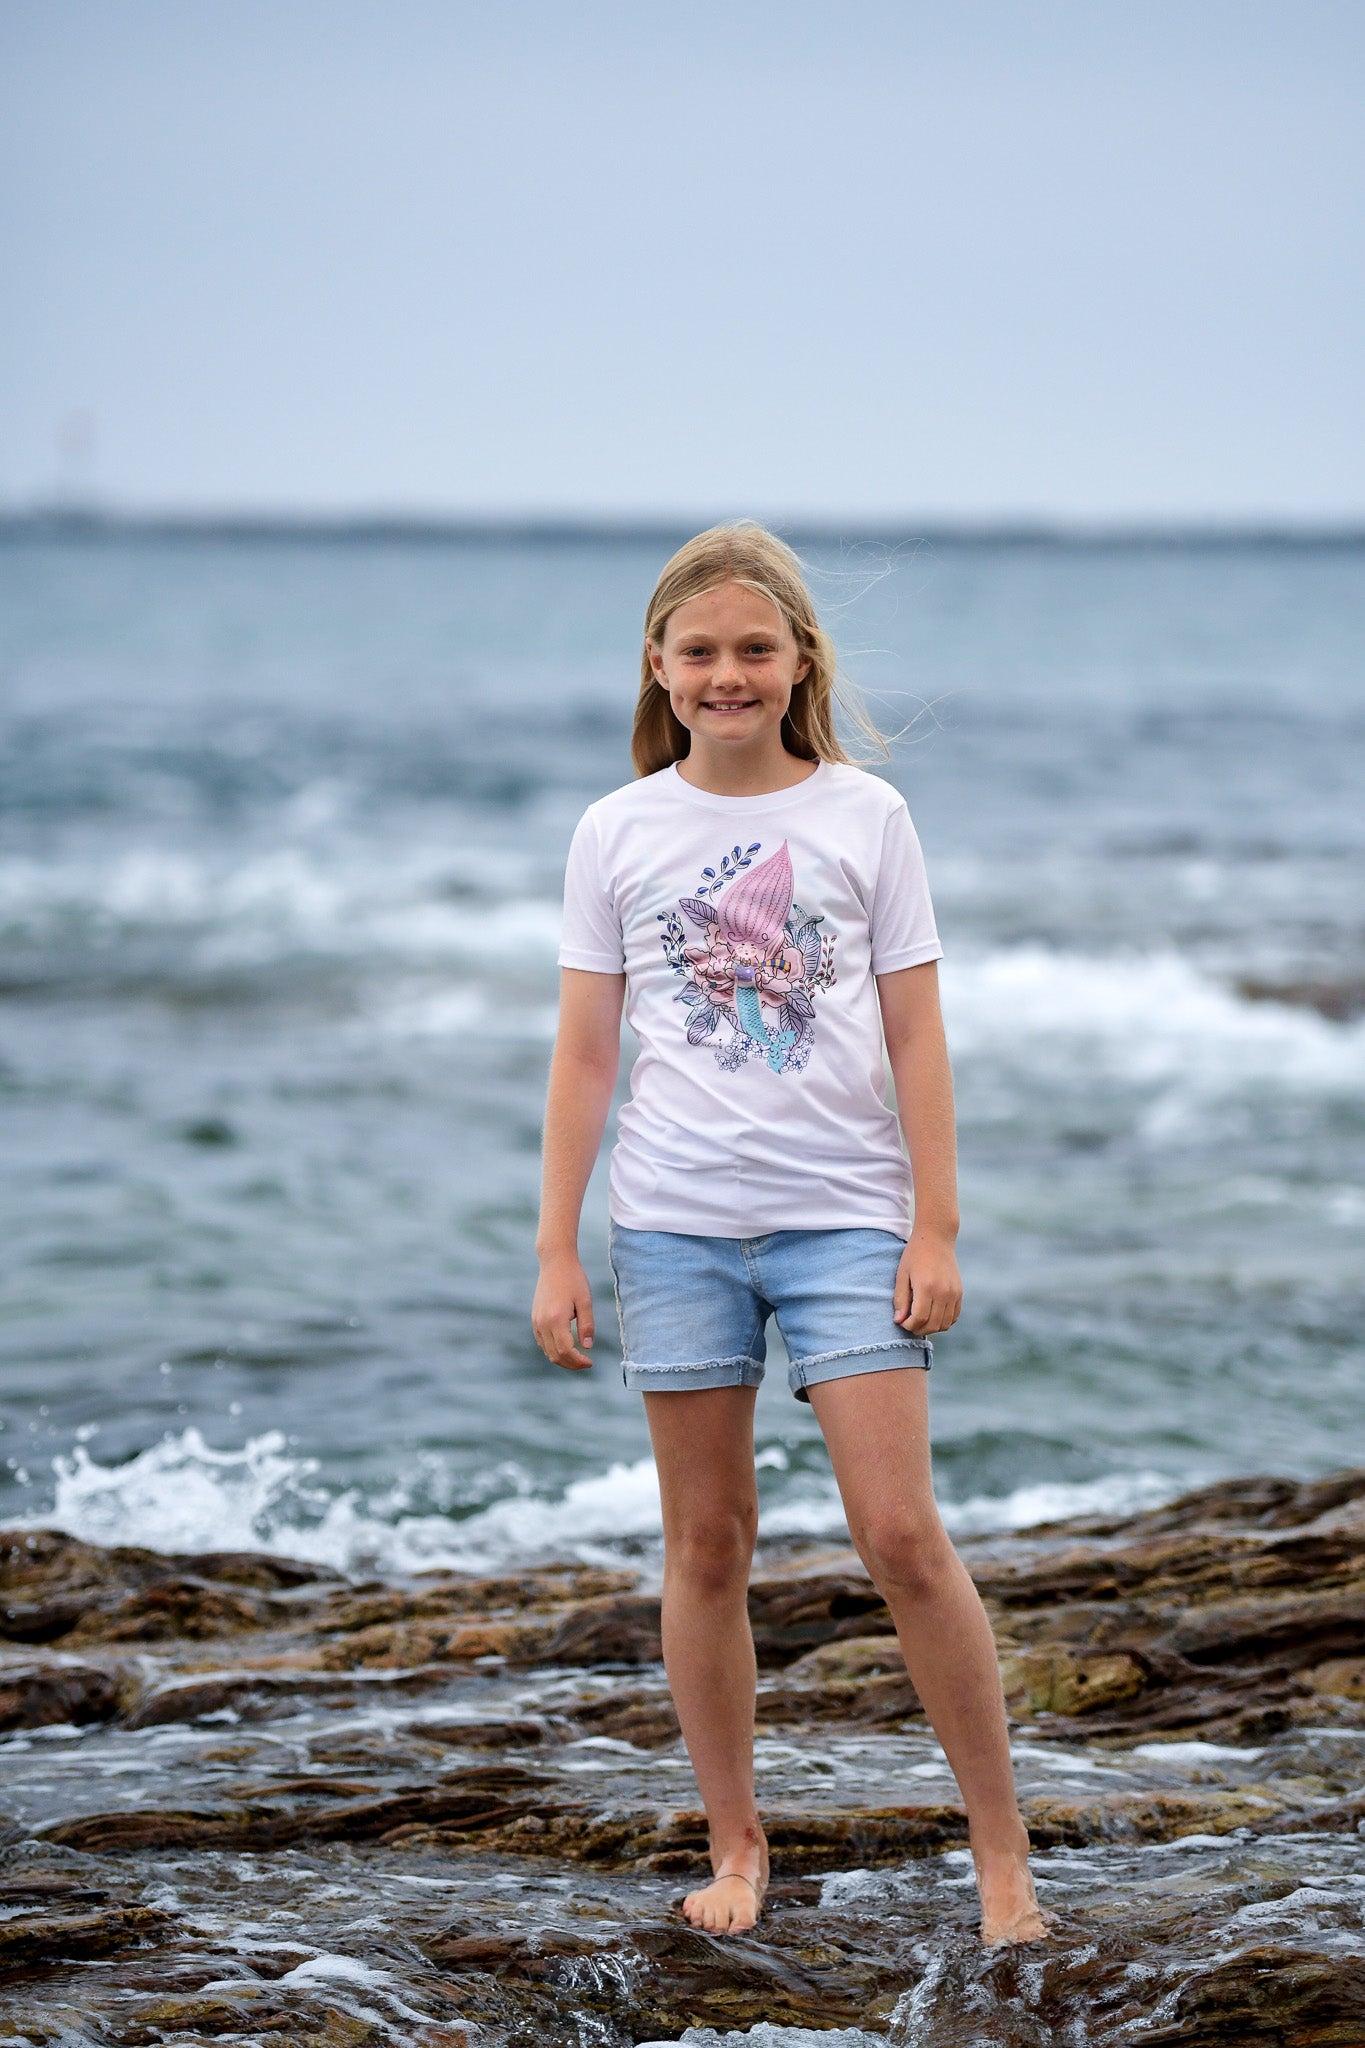 Handmade Floral Mermaid graphic tee for girls who love the beach and  sea creatures. Designed by Nadia Watts